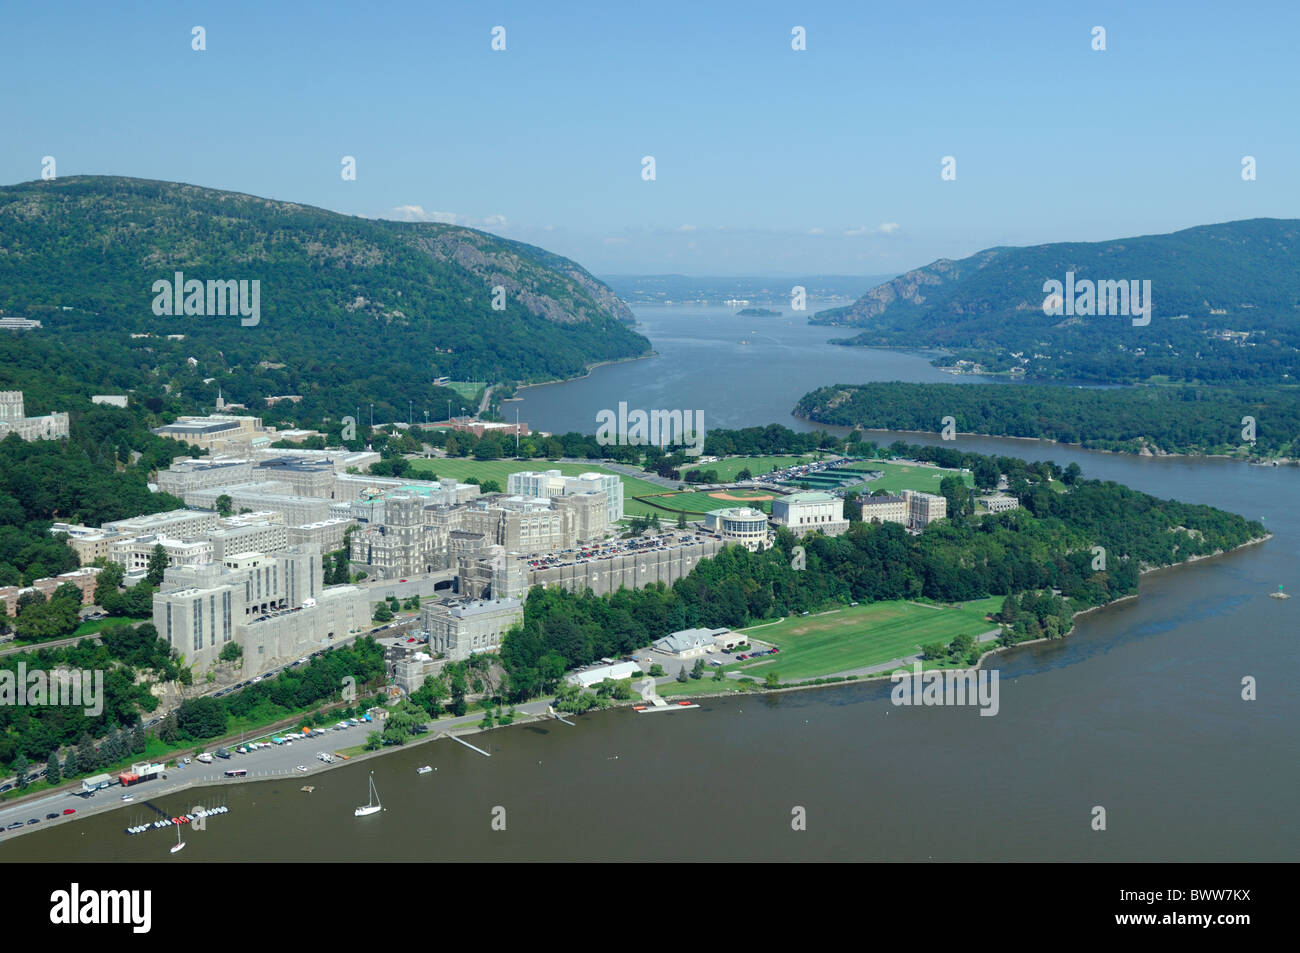 Aerial view of United States Military Academy buildings of West Point on riverside of Hudson river, New York state, Usa Stock Photo